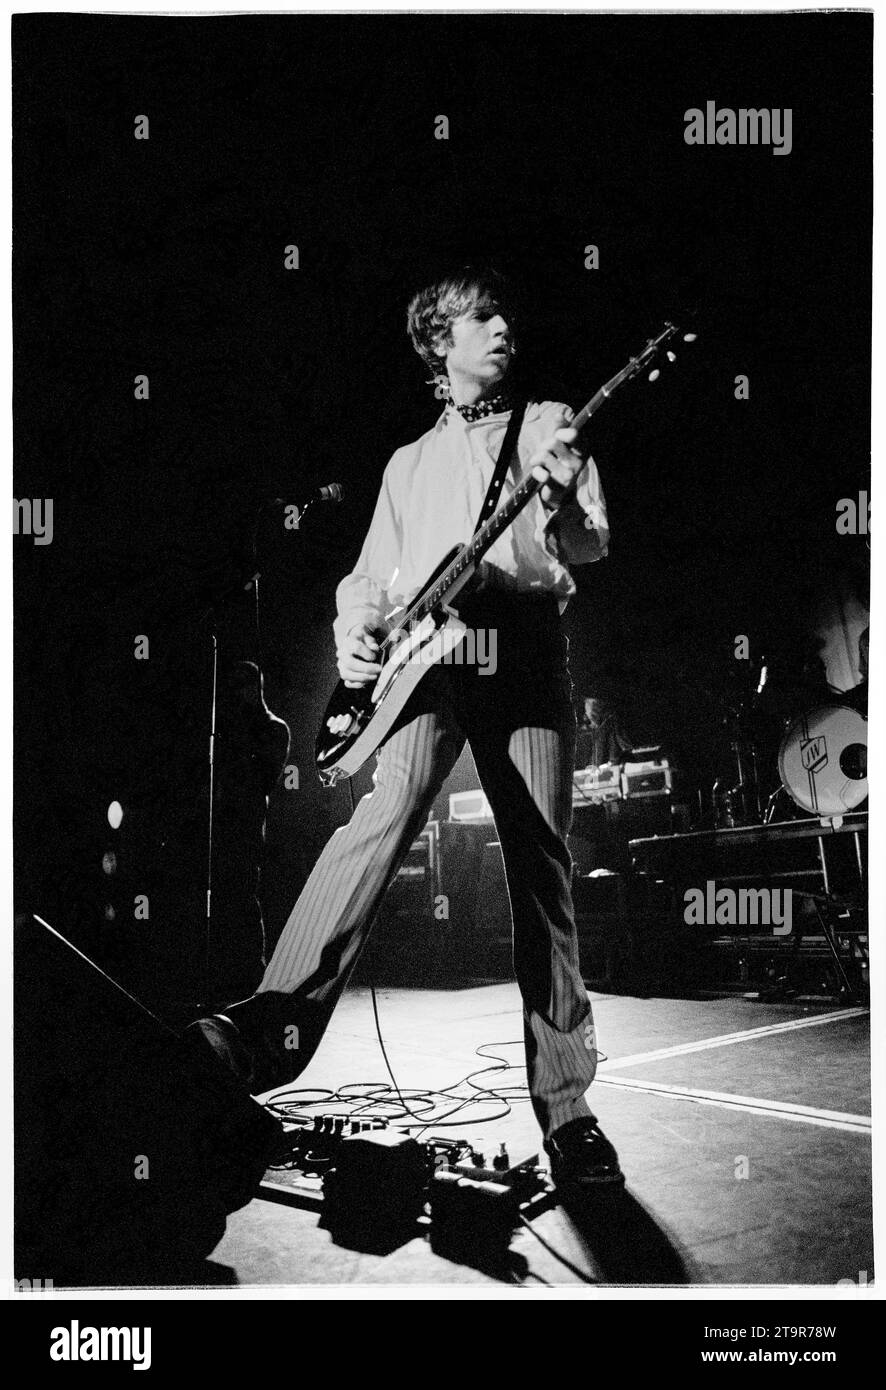 BECK, SINGER, 1997: Beck plays a one-off gig at Cardiff University to publicise the Odelay album on 3 March, 1997. The star only played two dates in the UK on this visit. The concert featured an incredible extended guitar battle with Beck on guitar and a champion scratch DJ manipulating a guitar chord on the decks. Photo: Rob Watkins Stock Photo